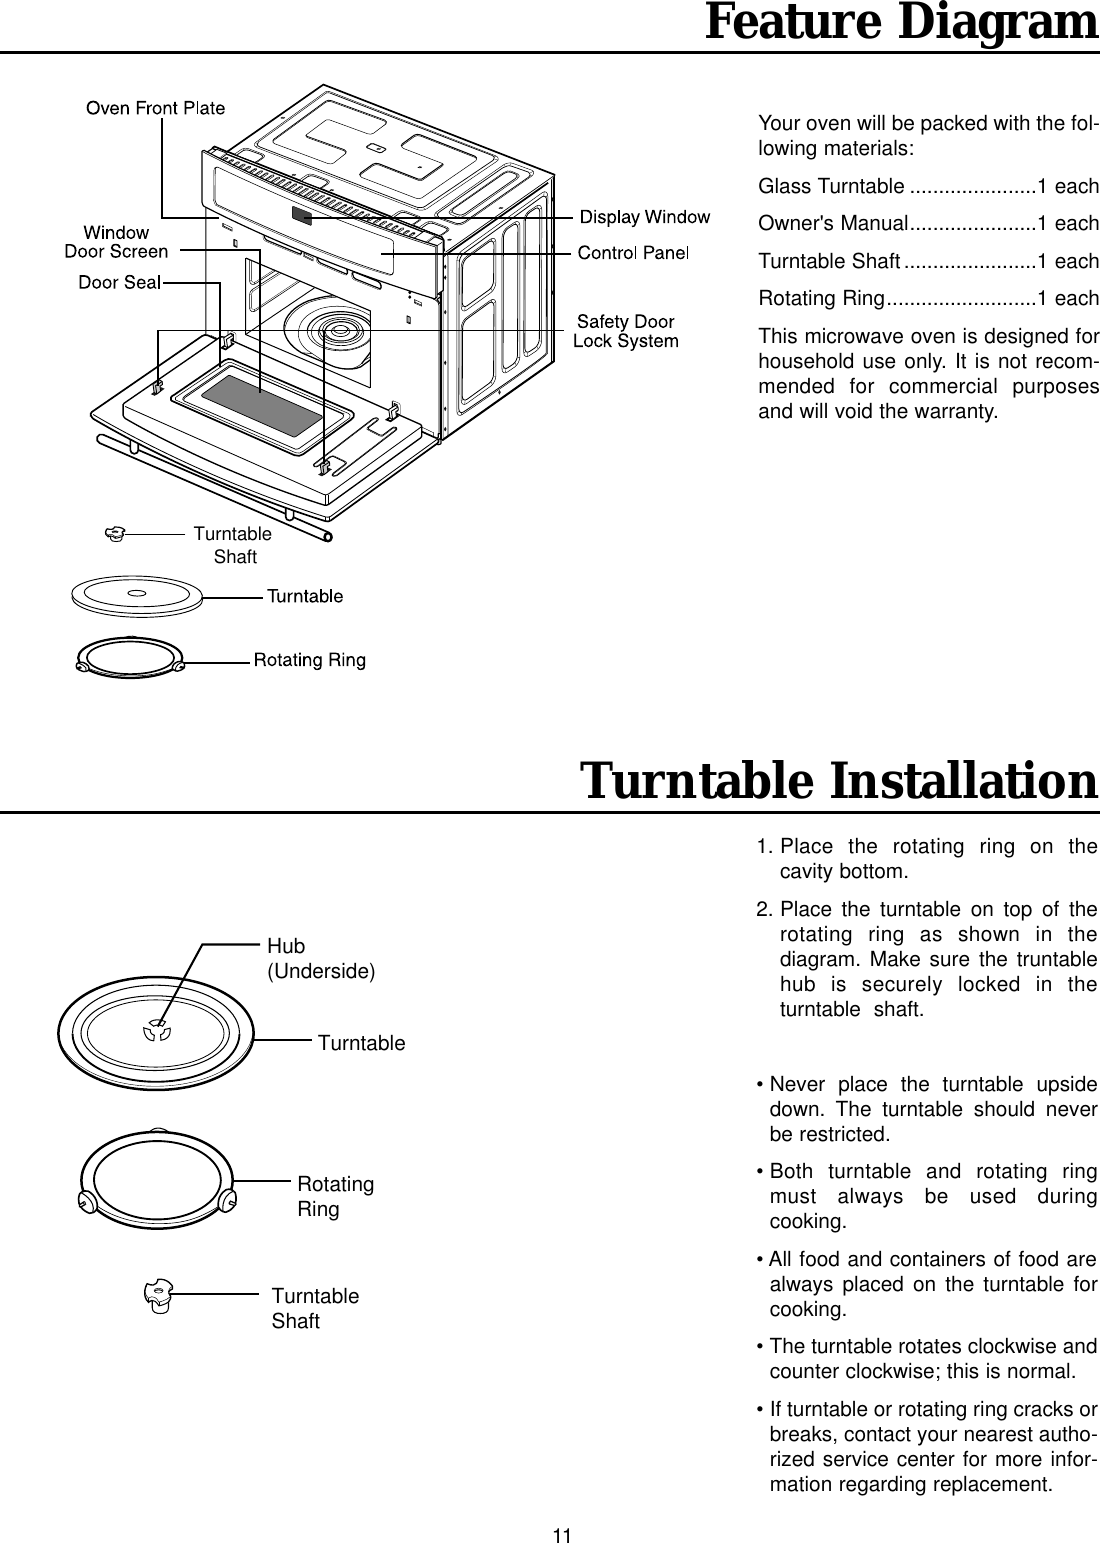 11Feature DiagramYour oven will be packed with the fol-lowing materials:Glass Turntable ......................1 eachOwner&apos;s Manual......................1 eachTurntable Shaft .......................1 eachRotating Ring..........................1 eachThis microwave oven is designed forhousehold use only. It is not recom-mended for commercial purposesand will void the warranty.Turntable ShaftTurntableRotatingRingHub(Underside)Turntable ShaftTurntable Installation1. Place the rotating ring on the cavity bottom.2. Place the turntable on top of therotating ring as shown in the diagram. Make sure the truntablehub is securely locked in theturntable  shaft.• Never place the turntable upsidedown. The turntable should neverbe restricted.• Both turntable and rotating ringmust always be used during cooking.• All food and containers of food arealways placed on the turntable forcooking. • The turntable rotates clockwise andcounter clockwise; this is normal.• If turntable or rotating ring cracks orbreaks, contact your nearest autho-rized service center for more infor-mation regarding replacement.